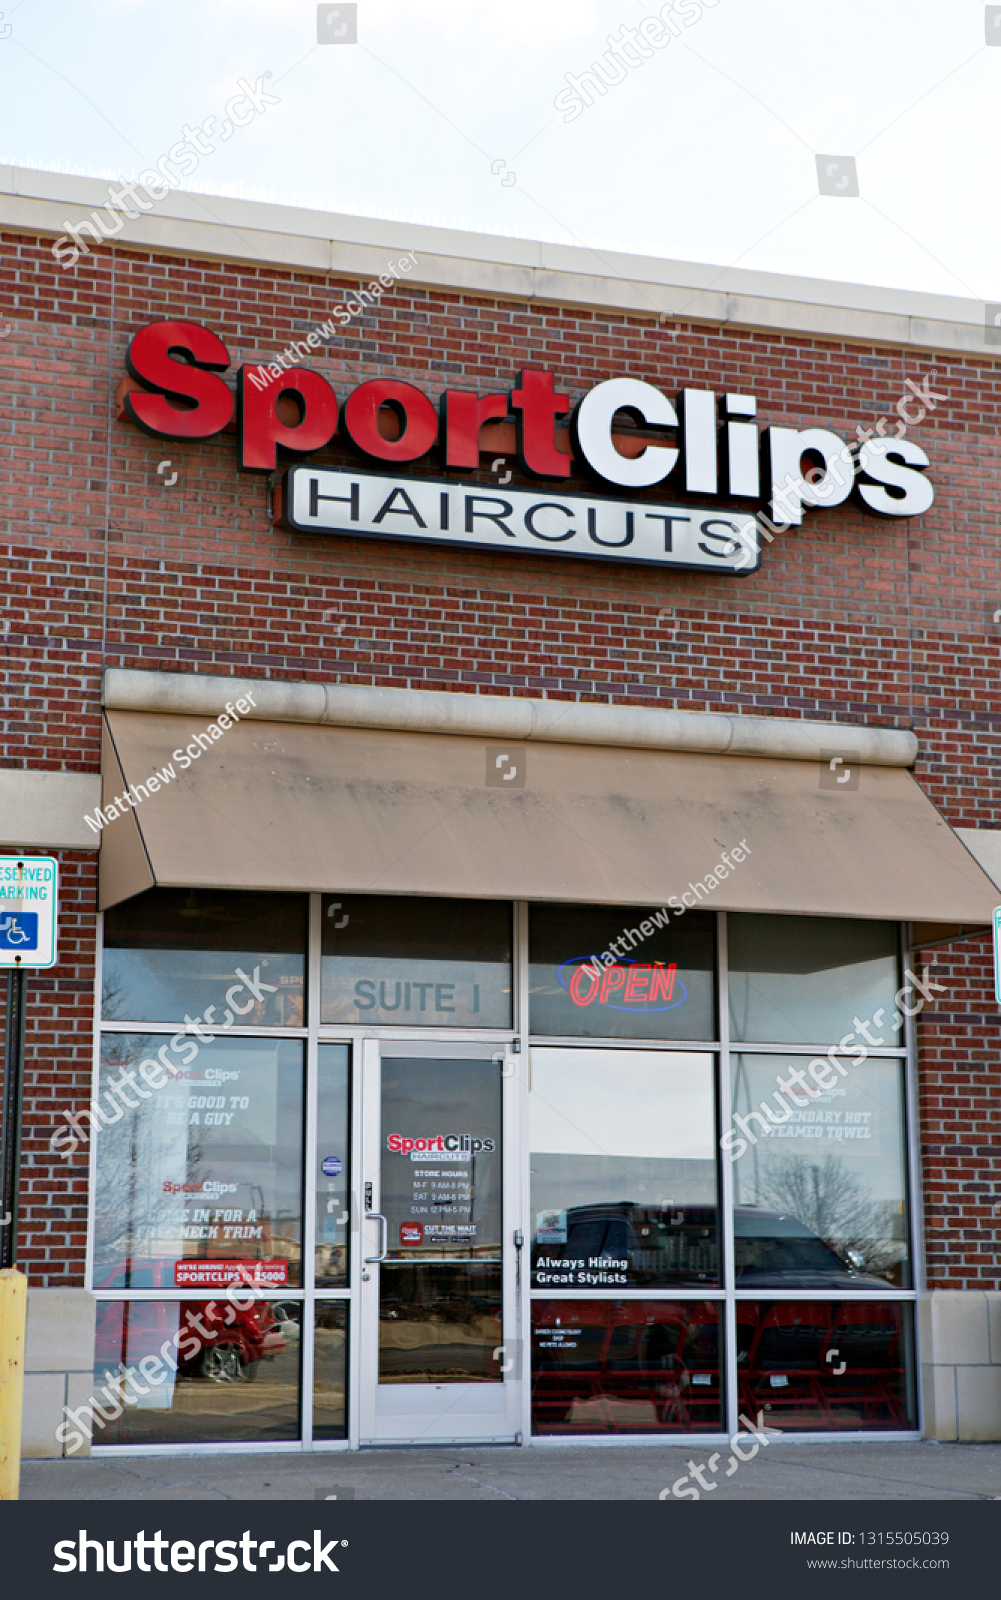 Stock Photo Greenwood In February The Front Entrance To A Sportclips The Message Haircuts Is In 1315505039 